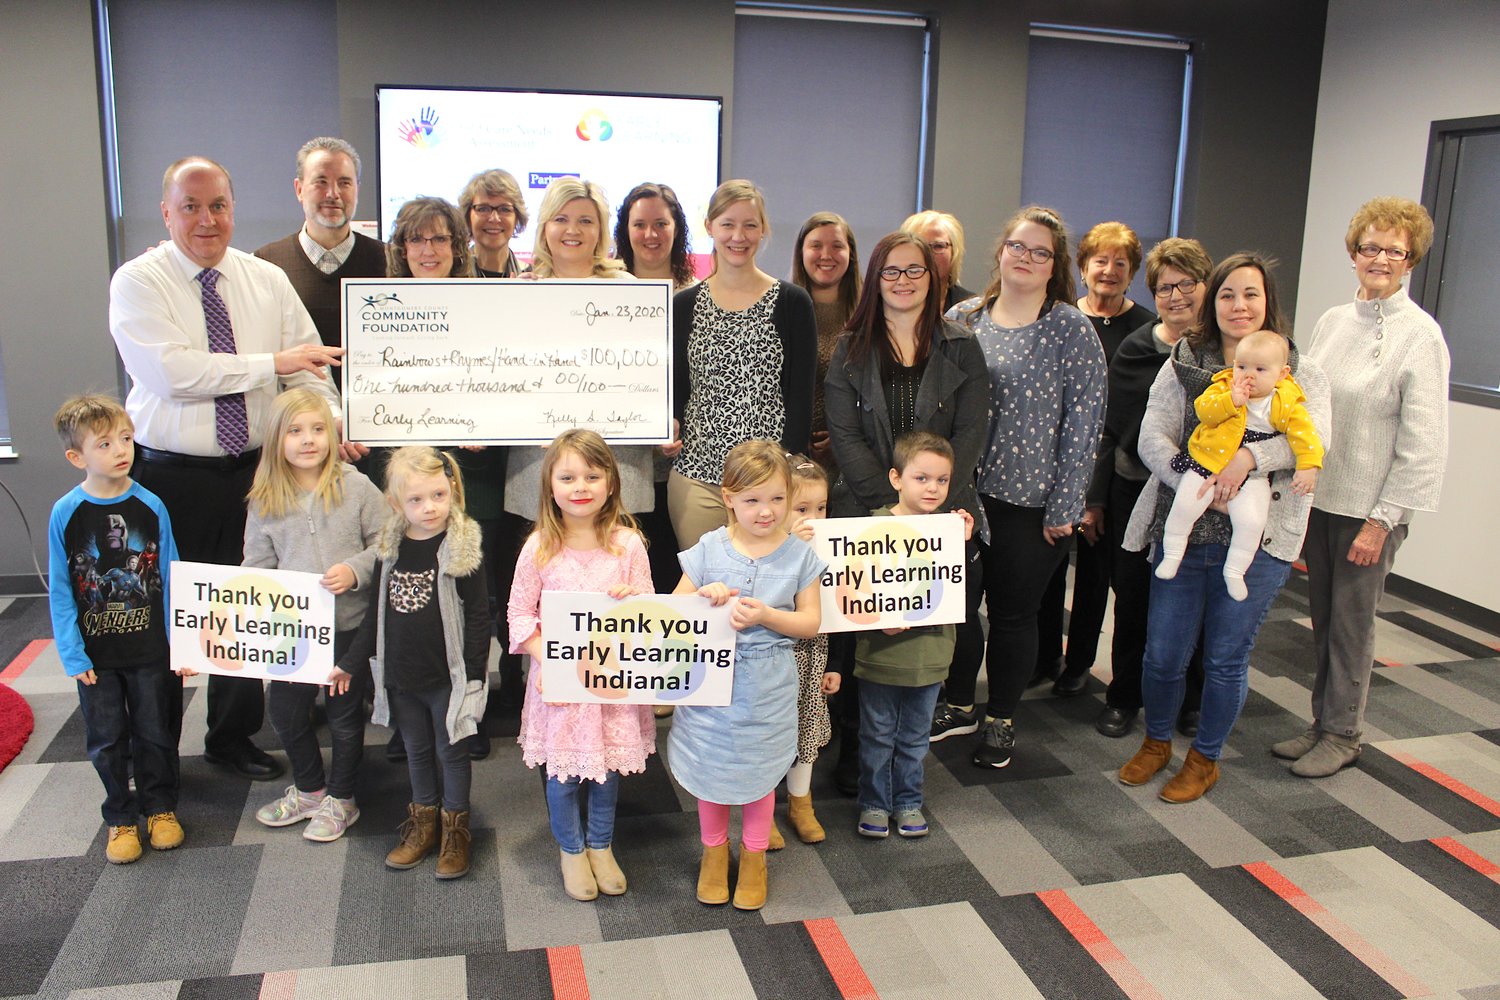 Mayor Todd Barton, from left, Rainbows and Rhymes Director Rachel Campbell and Montgomery County Community Foundation Executive Director Kelly Taylor hold a grant check for $100,000 made out to Rainbows and Rhymes and Hand-In-Hand preschools Thursday on the third floor of the Fusion 54 building.